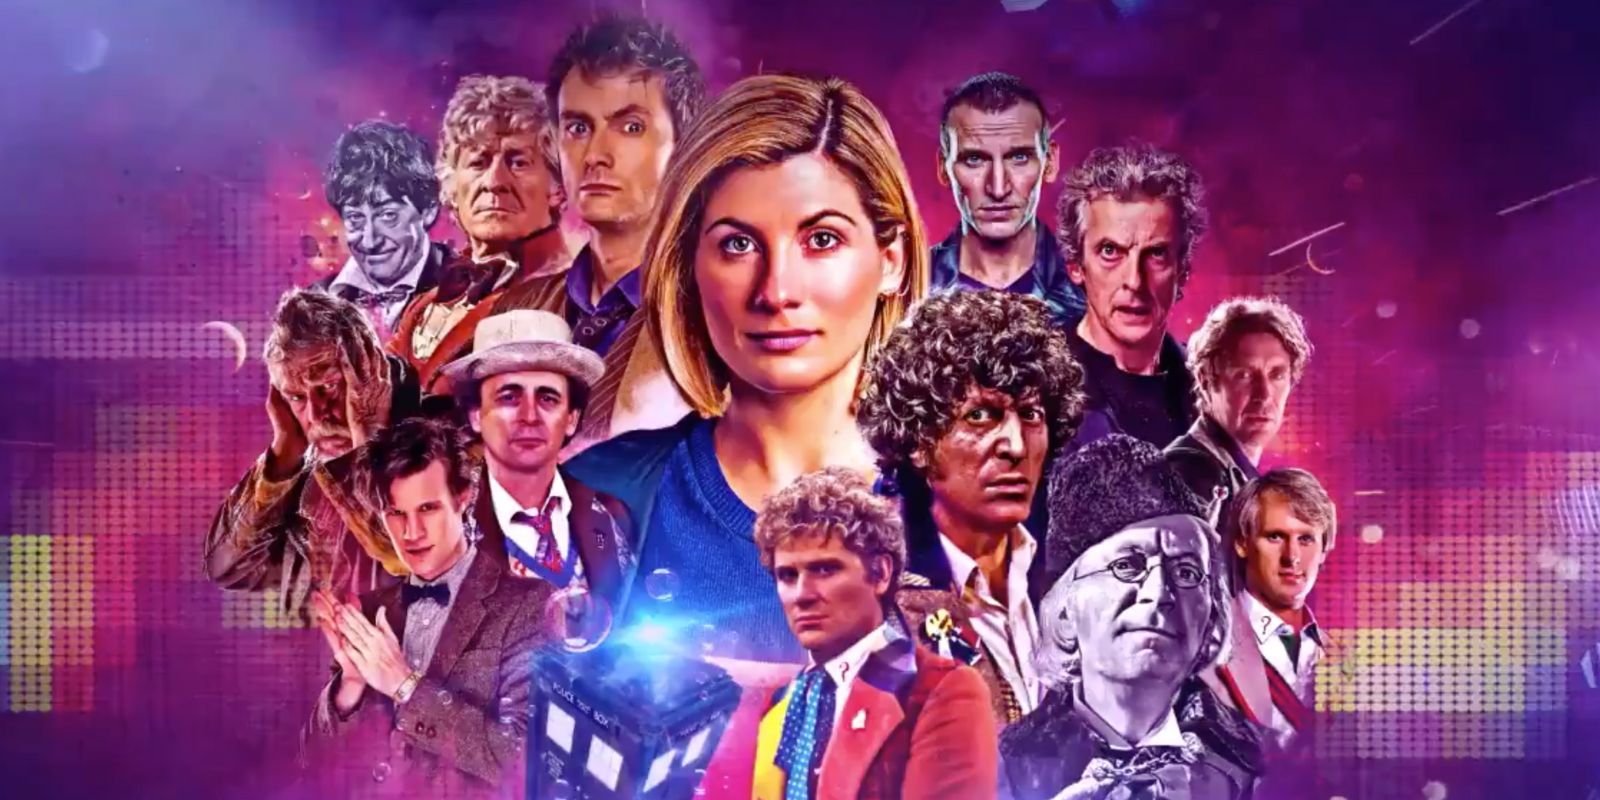 Doctor Who Finds a New Streaming Home in Disney+